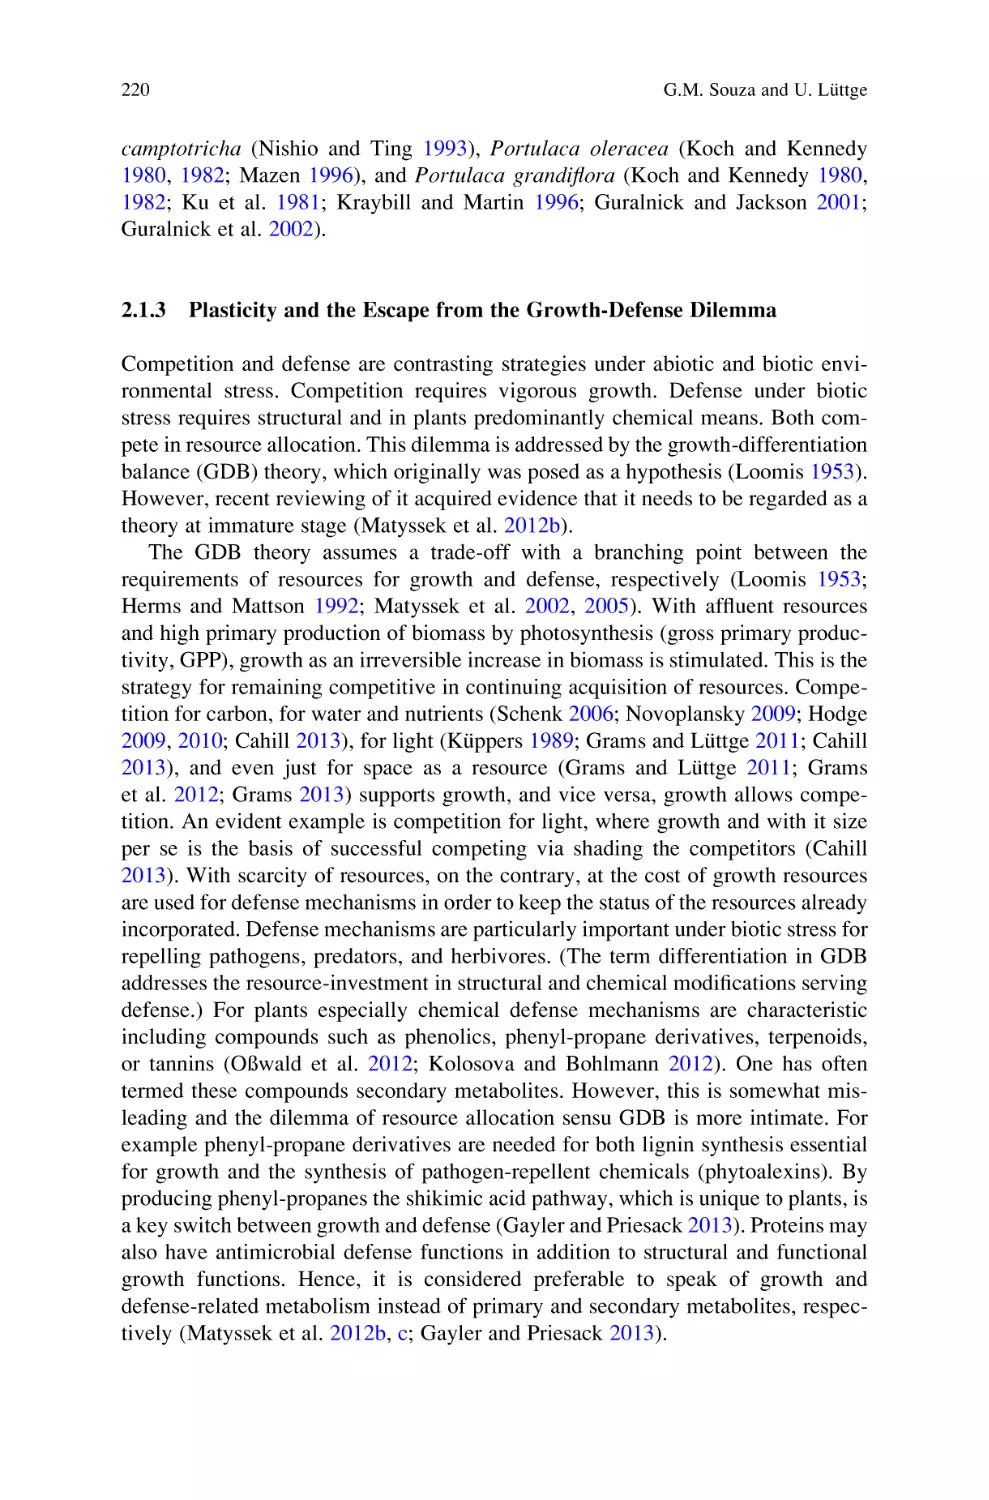 2.1.3 Plasticity and the Escape from the Growth-Defense Dilemma